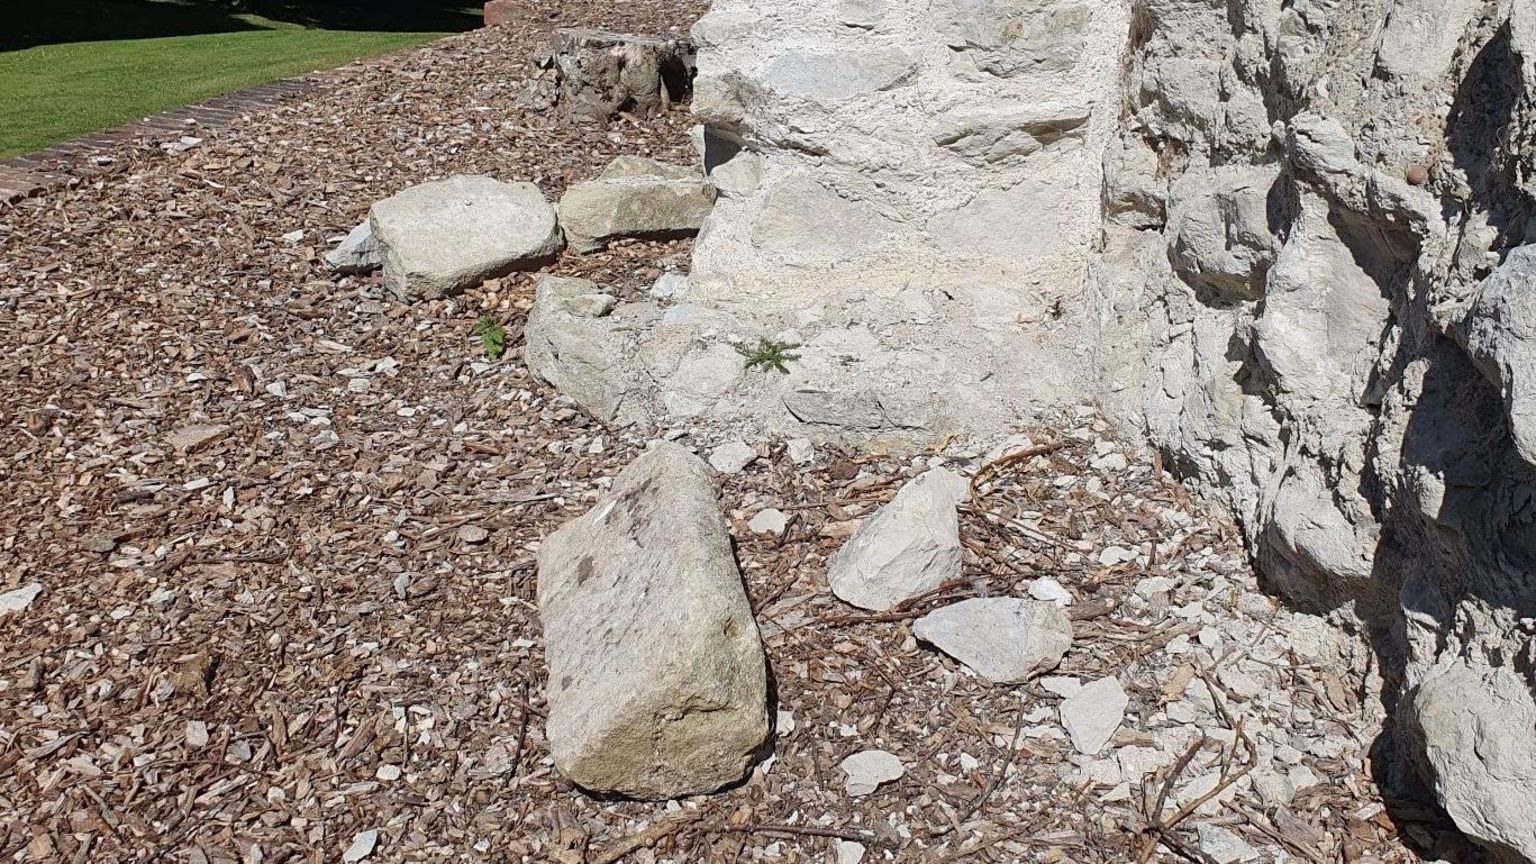 A large grey stone brick is on the floor in front of a castle wall, with other smashed pieces of stone around it.